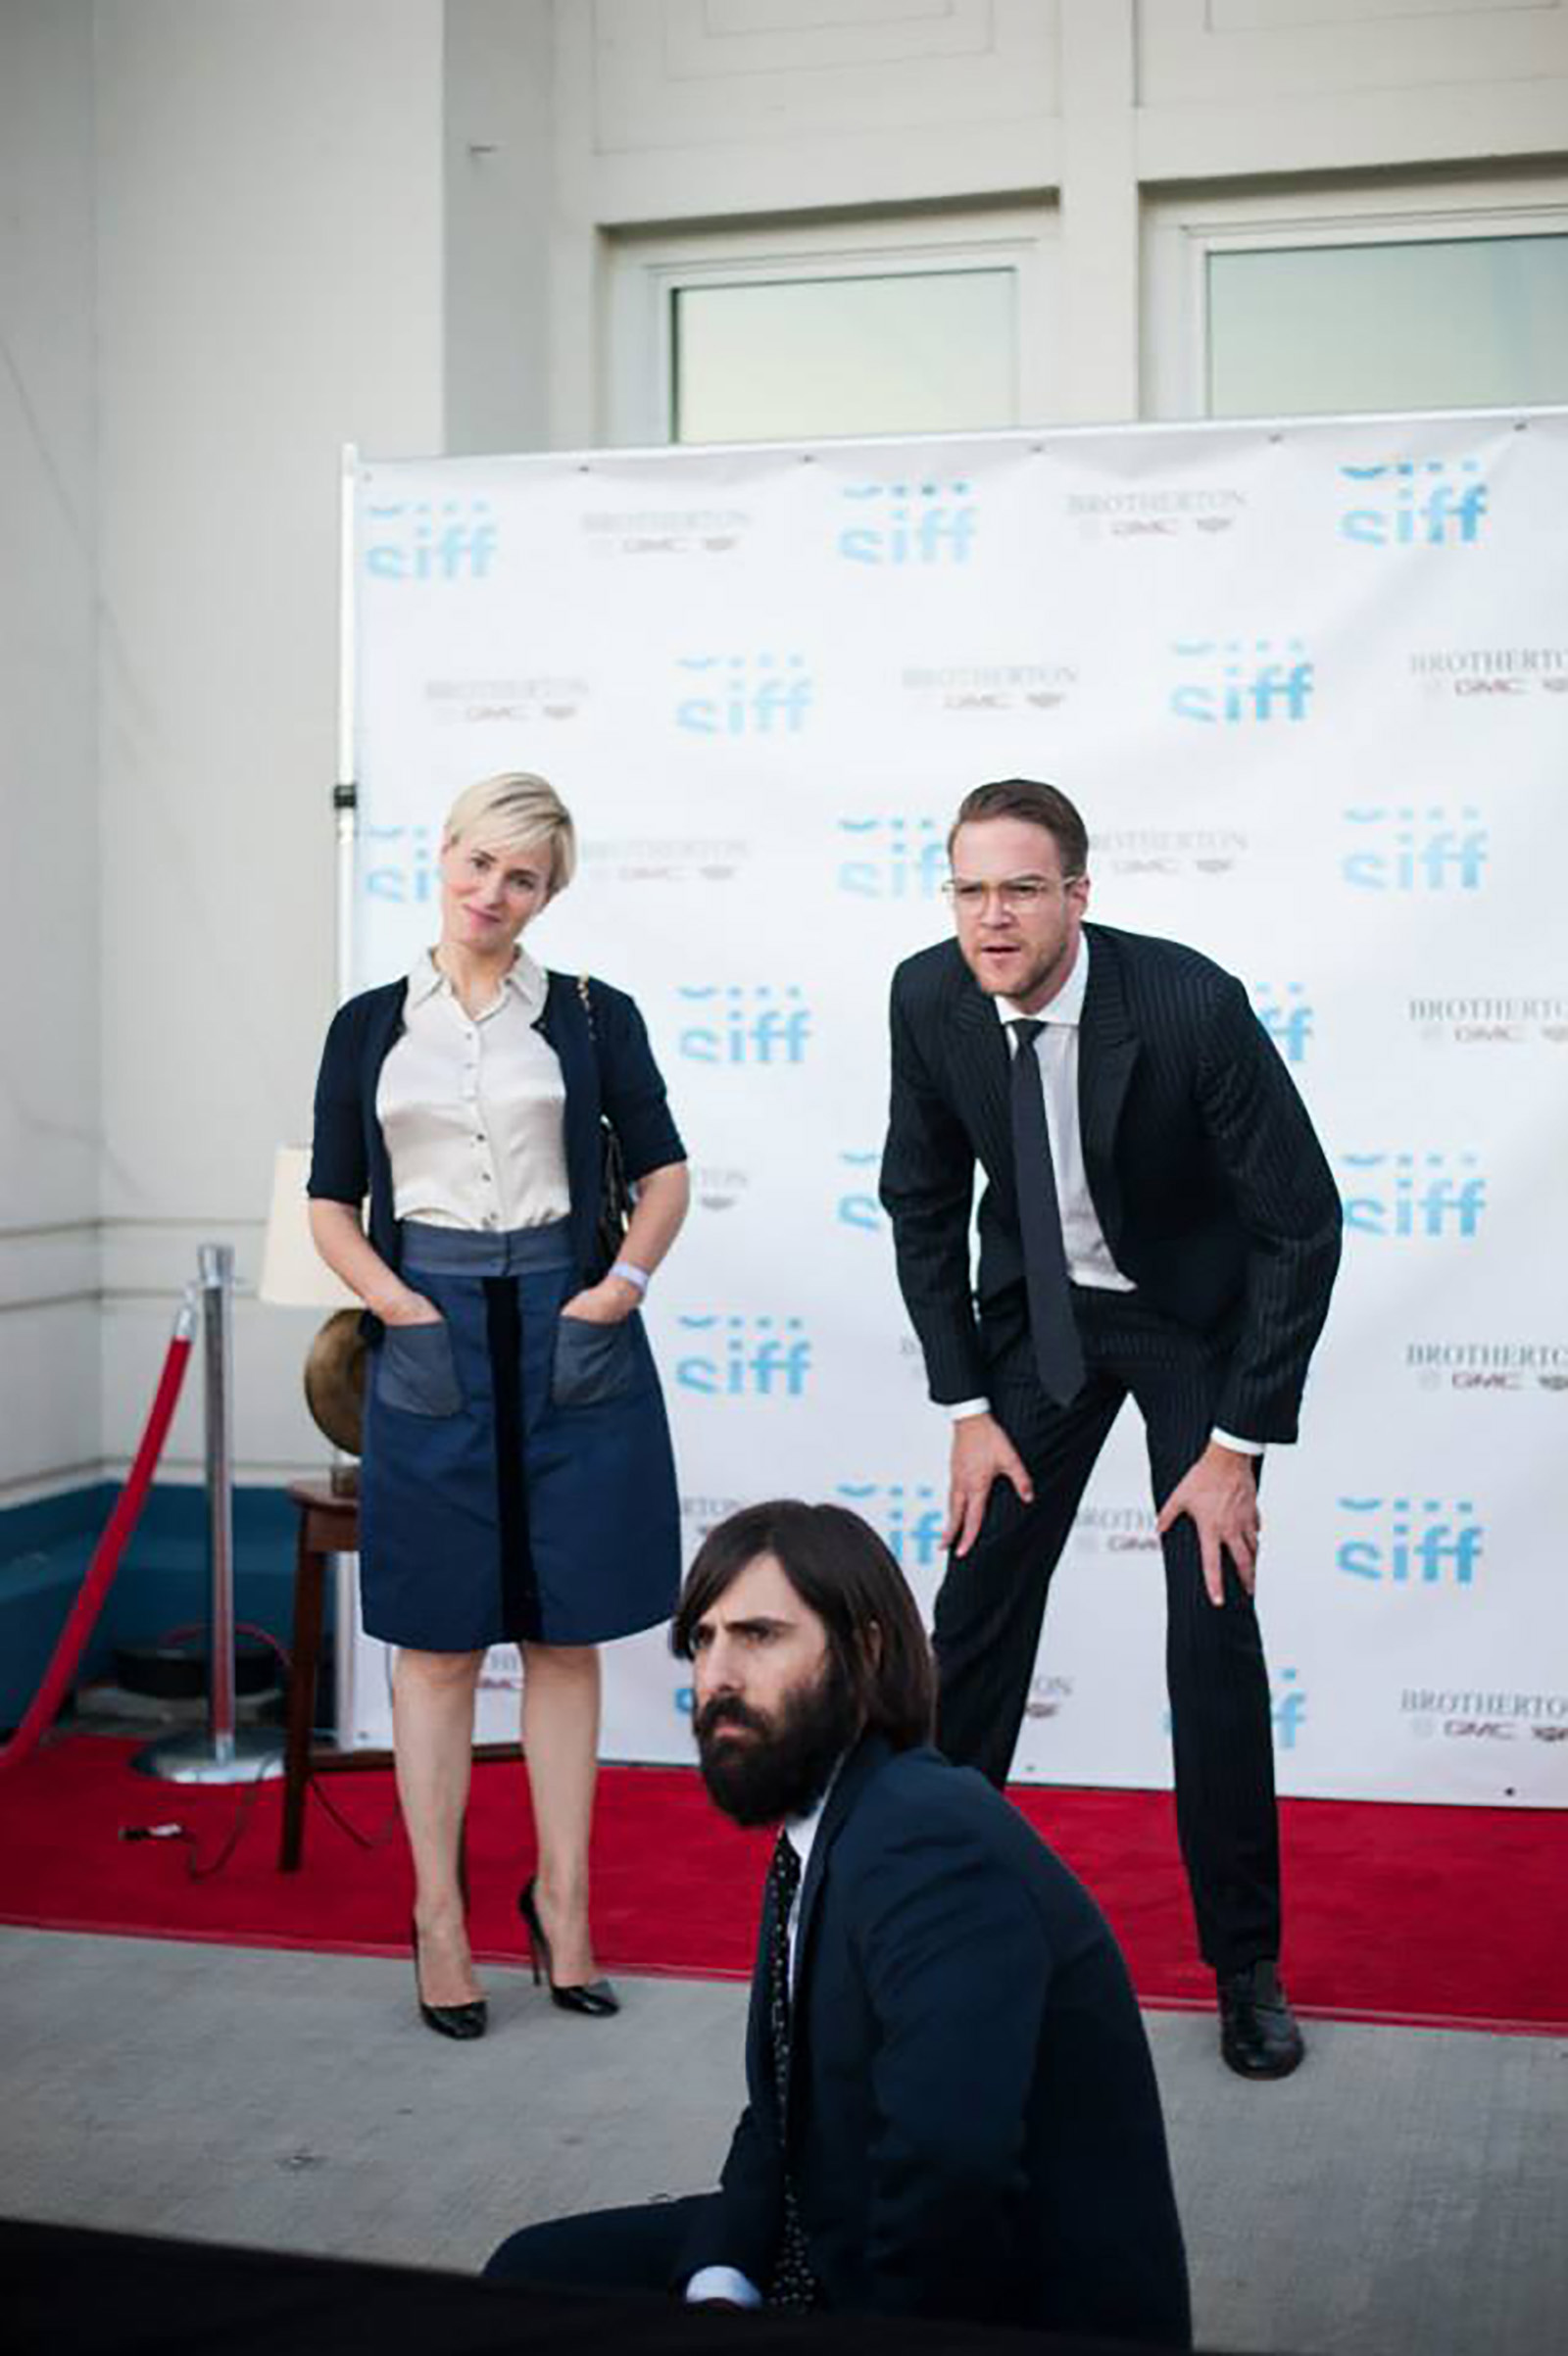 Actress, Taylor Schilling, actor, Jason Schwartzman, and director, Patrick Brice, strike a pose on Cinerama's red carpet for a screening of their film, The Overnight, to close out the festival